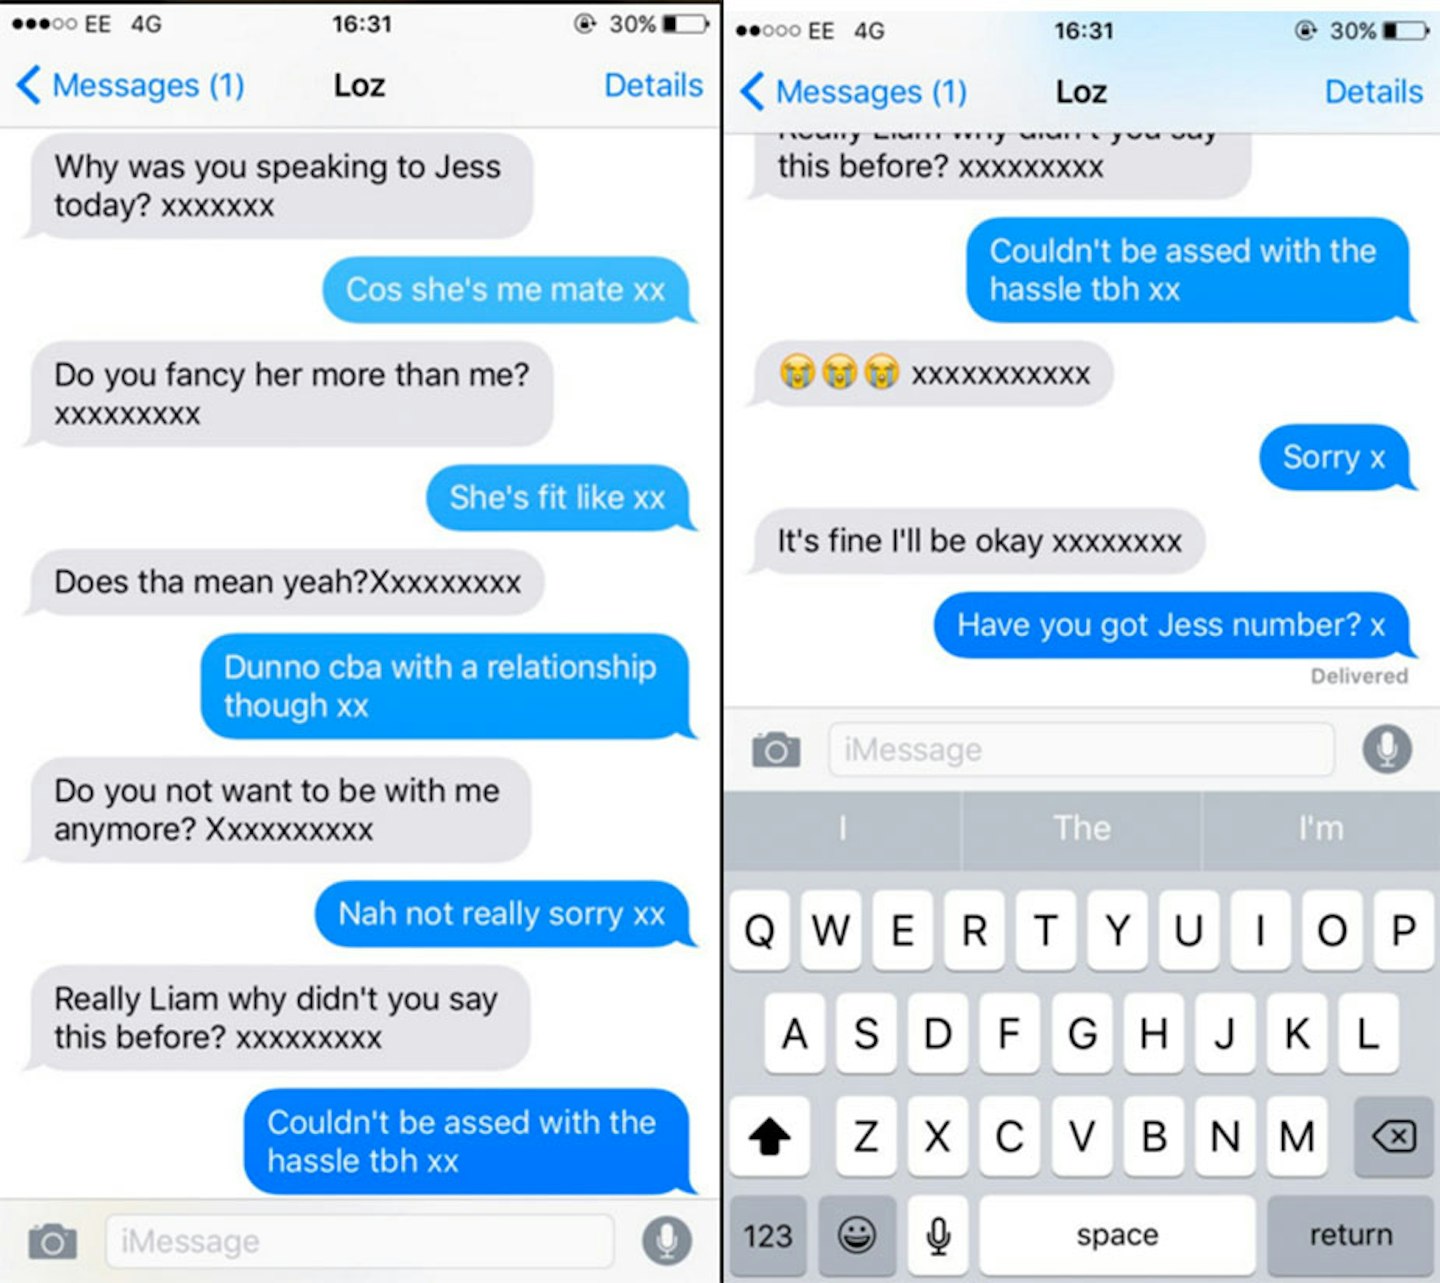 Annie Williams Twitter viral photos of brother's texts